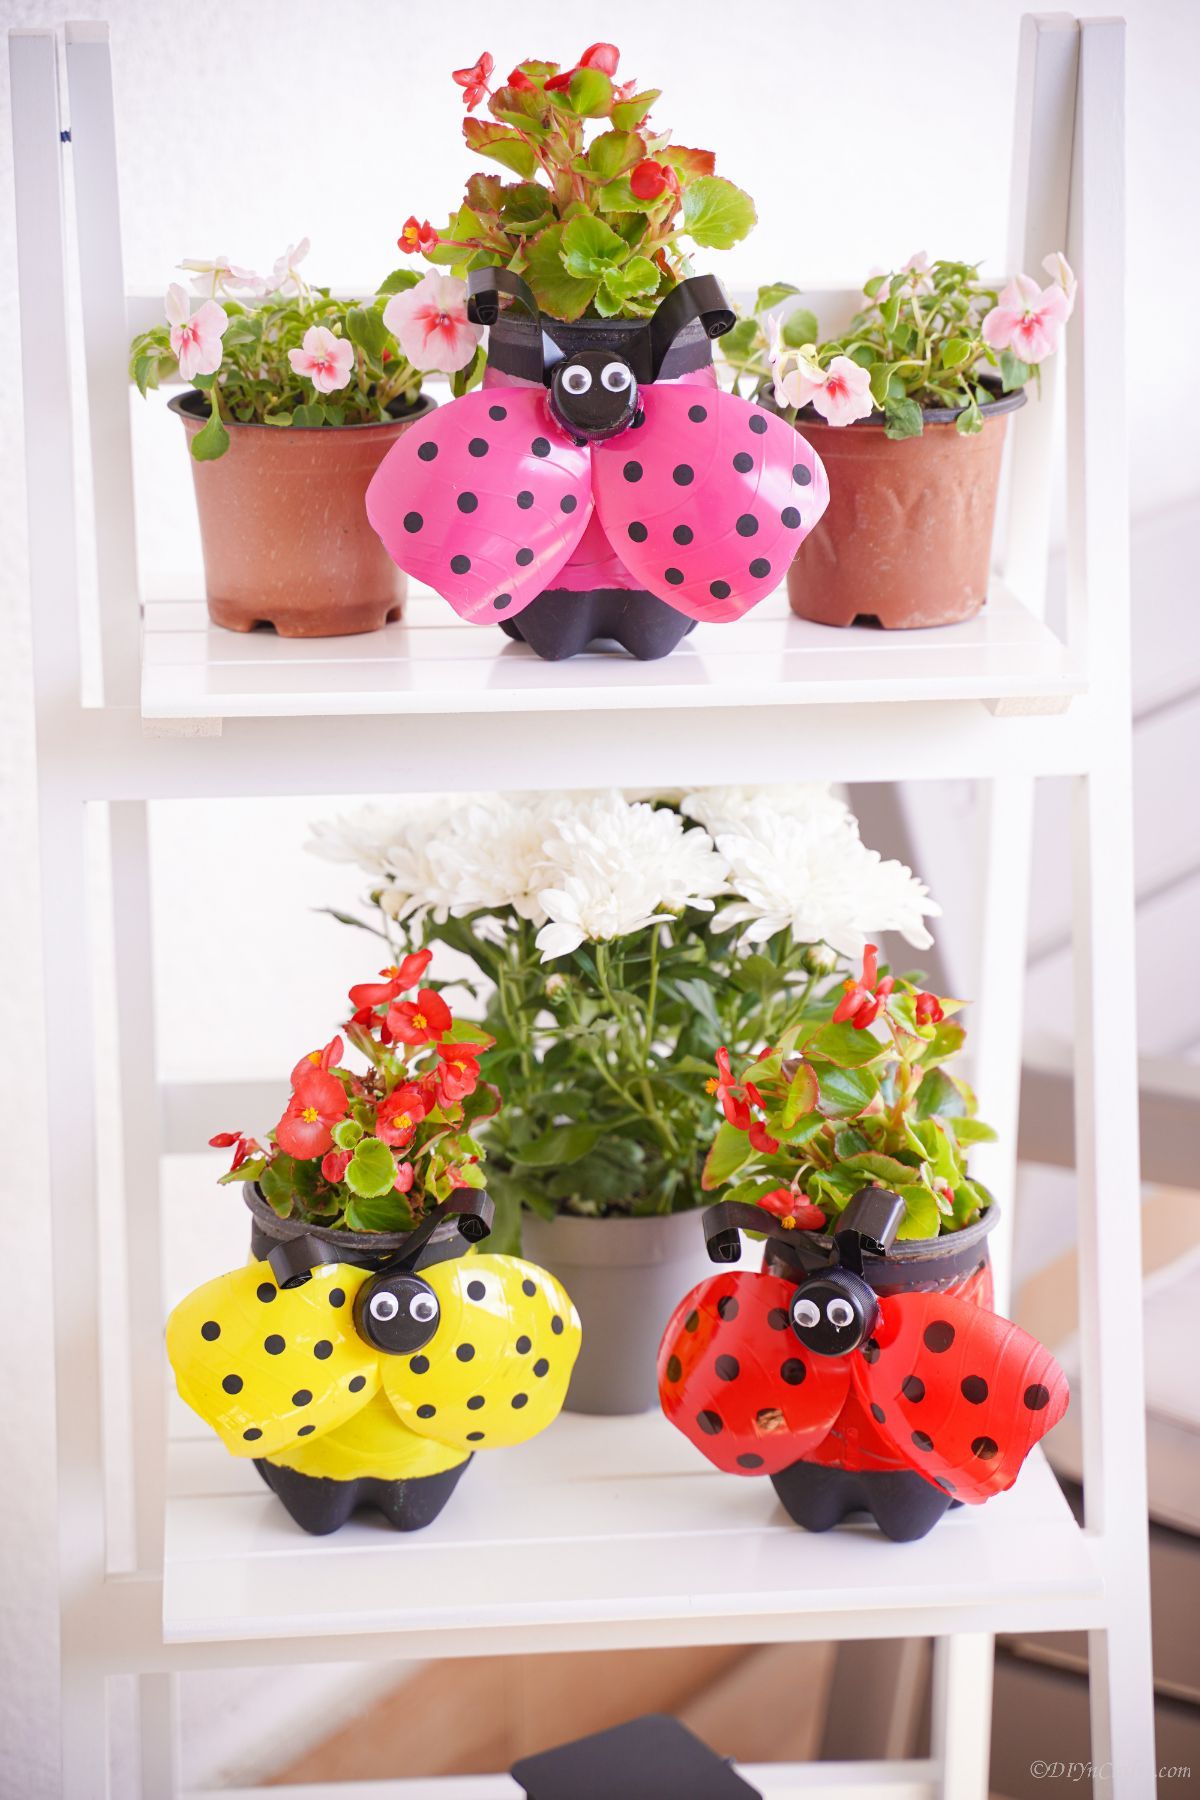 pink yellow and red ladybug planters on white shelf